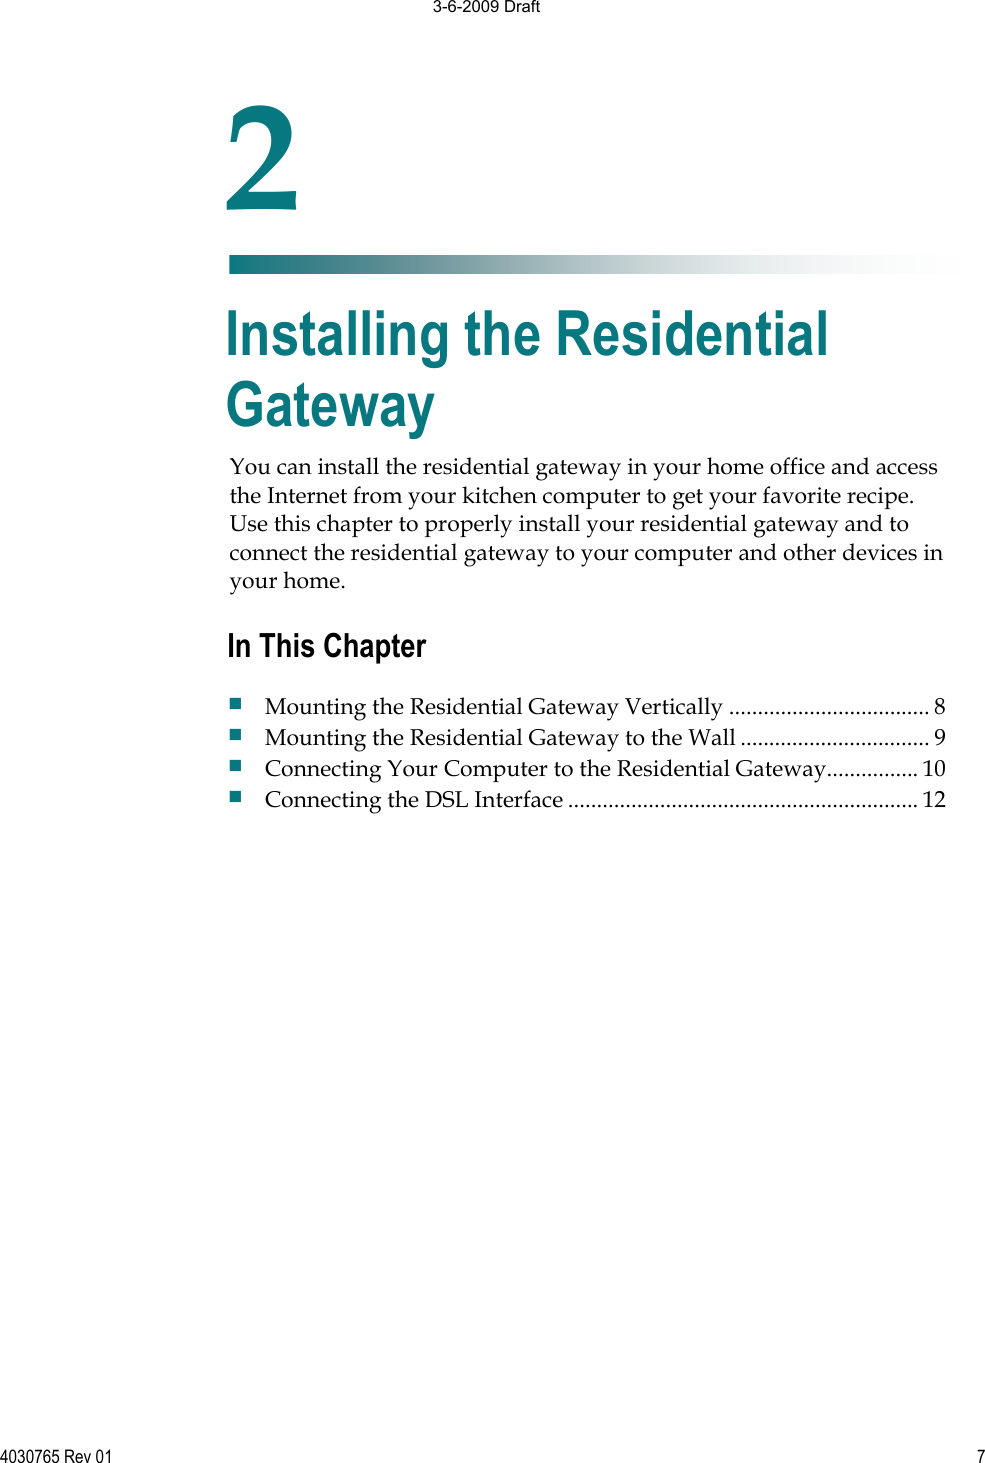 4030765 Rev 01 7You can install the residential gateway in your home office and access the Internet from your kitchen computer to get your favorite recipe. Use this chapter to properly install your residential gateway and to connect the residential gateway to your computer and other devices in your home. 2Chapter 2Installing the Residential Gateway In This Chapter Mounting the Residential Gateway Vertically ................................... 8 Mounting the Residential Gateway to the Wall ................................. 9 Connecting Your Computer to the Residential Gateway................ 10 Connecting the DSL Interface ............................................................. 12 3-6-2009 Draft